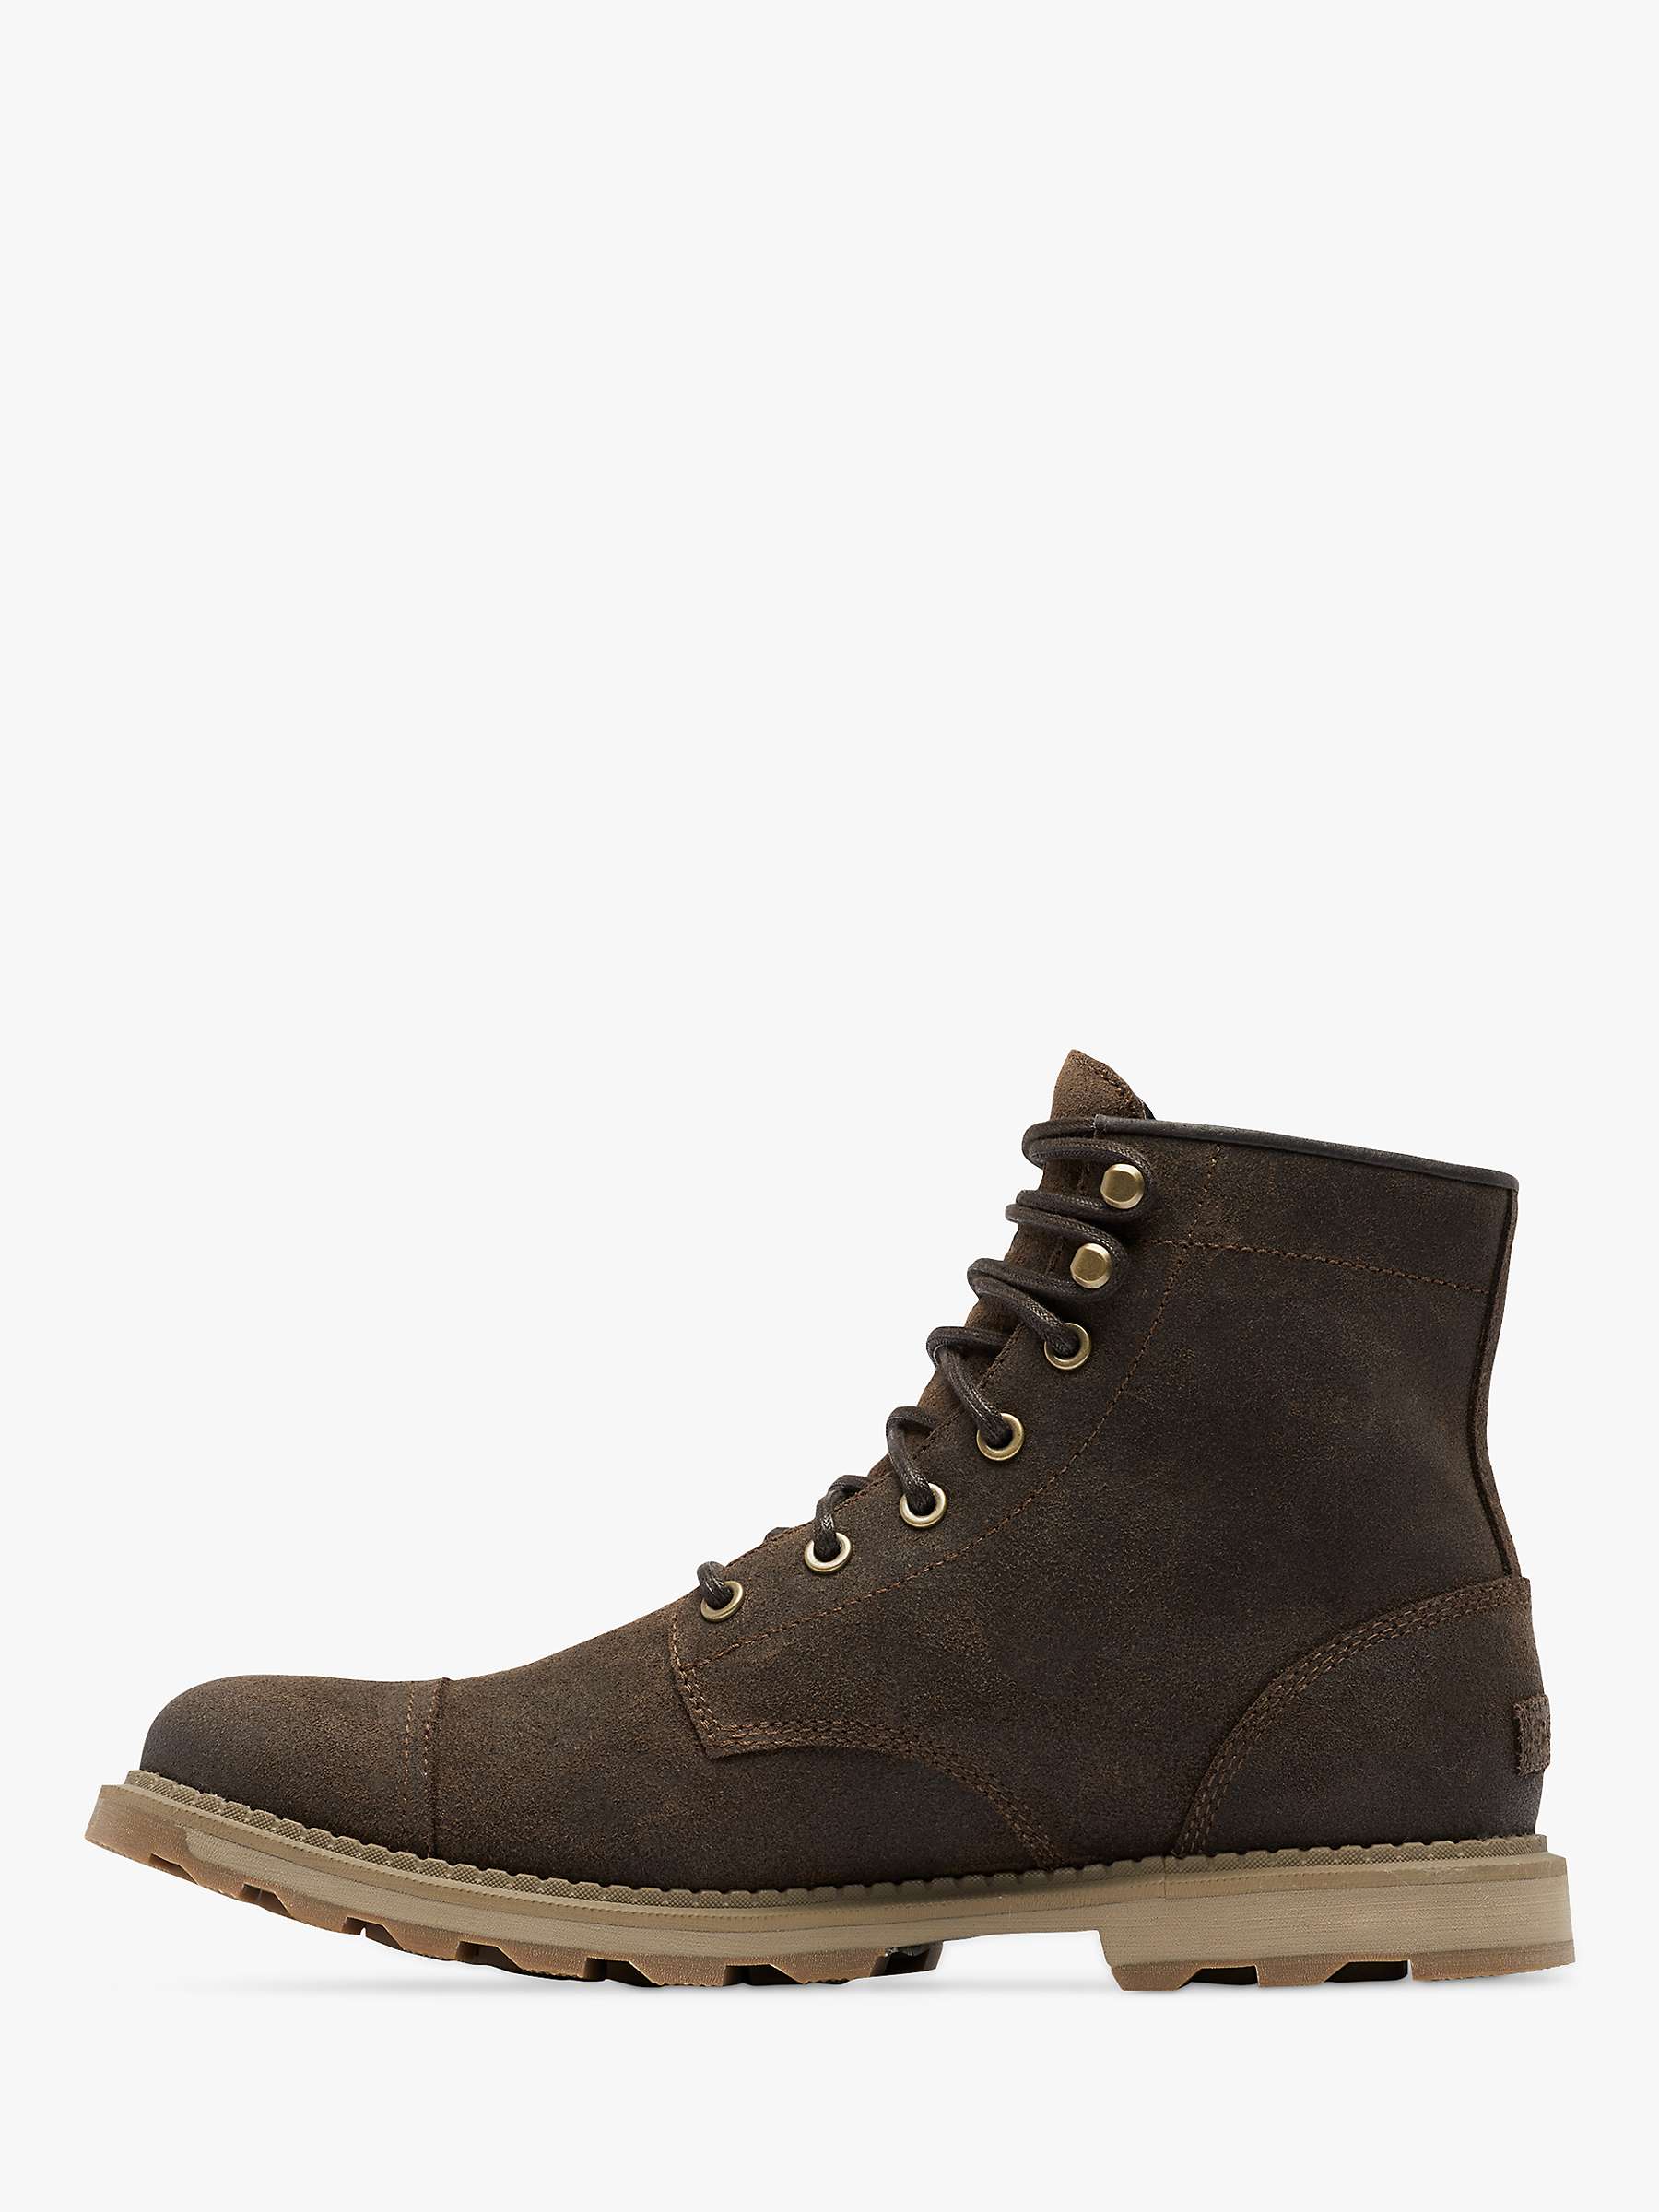 SOREL Madson II Chore Suede Waterproof Ankle Boots, Tobacco at John ...